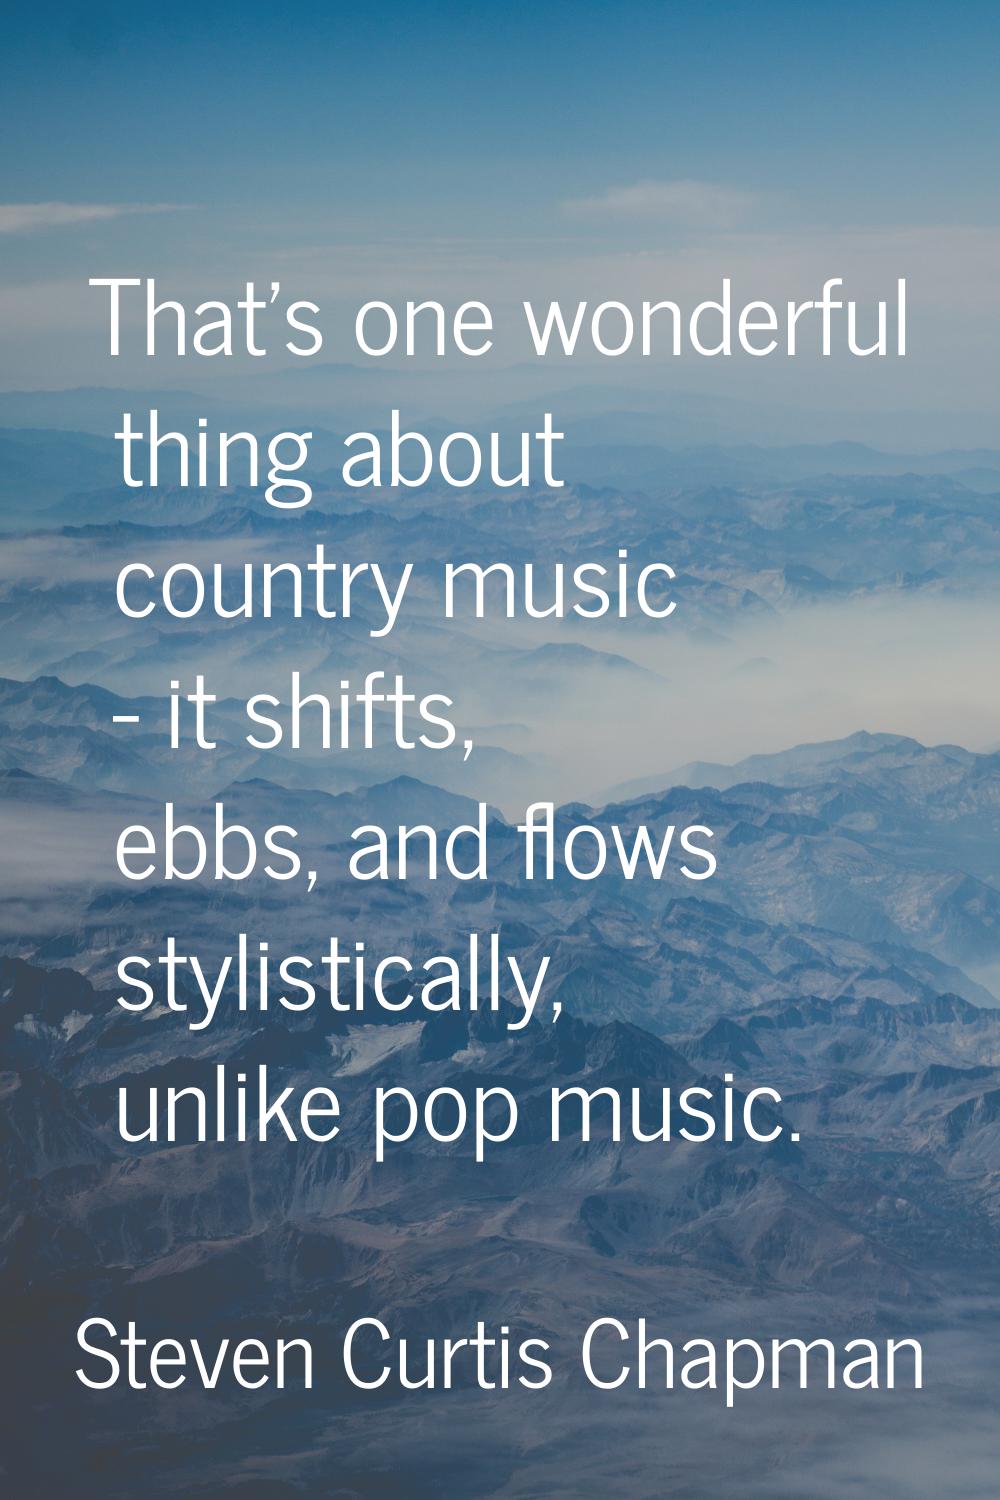 That's one wonderful thing about country music - it shifts, ebbs, and flows stylistically, unlike p